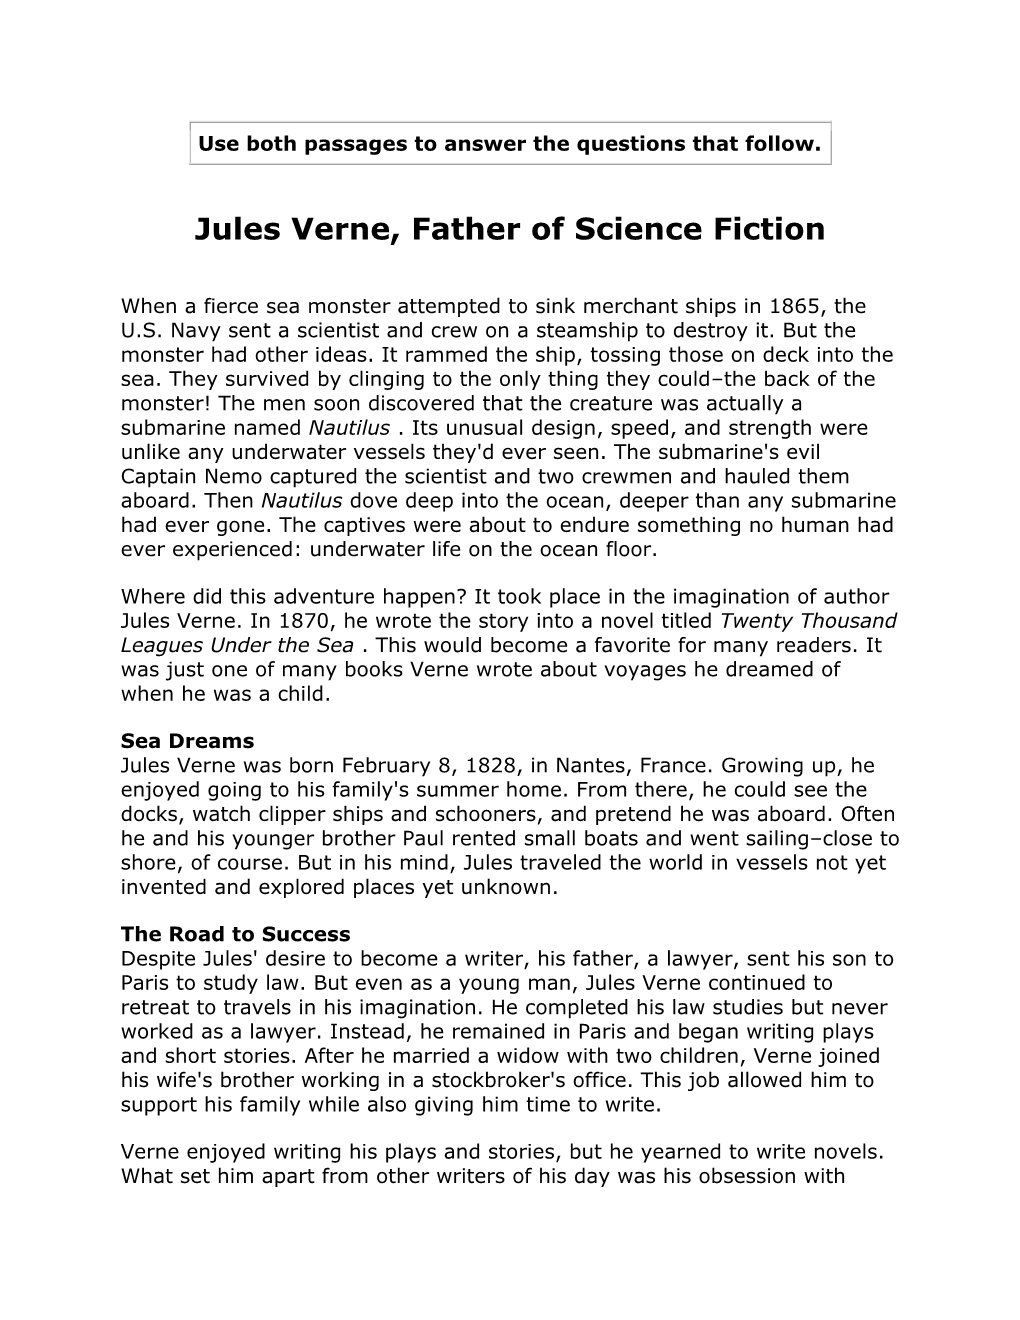 Jules Verne, Father of Science Fiction